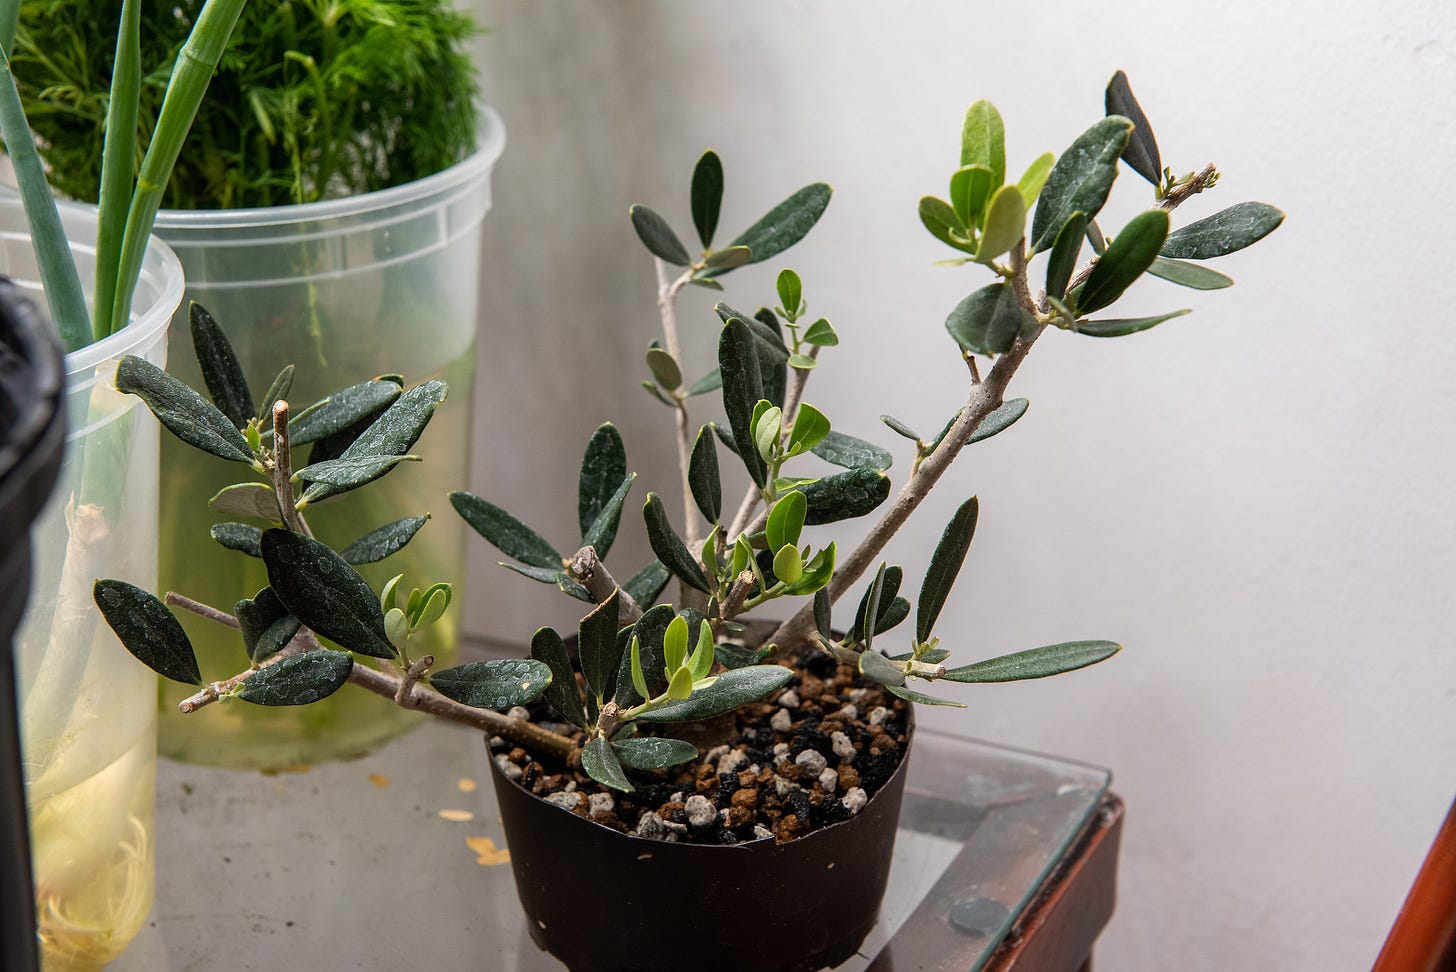 ID: Olive branch cutting in a plastic pot of bonsai soil on my kitchen table alongside larger pots of herbs and plants.